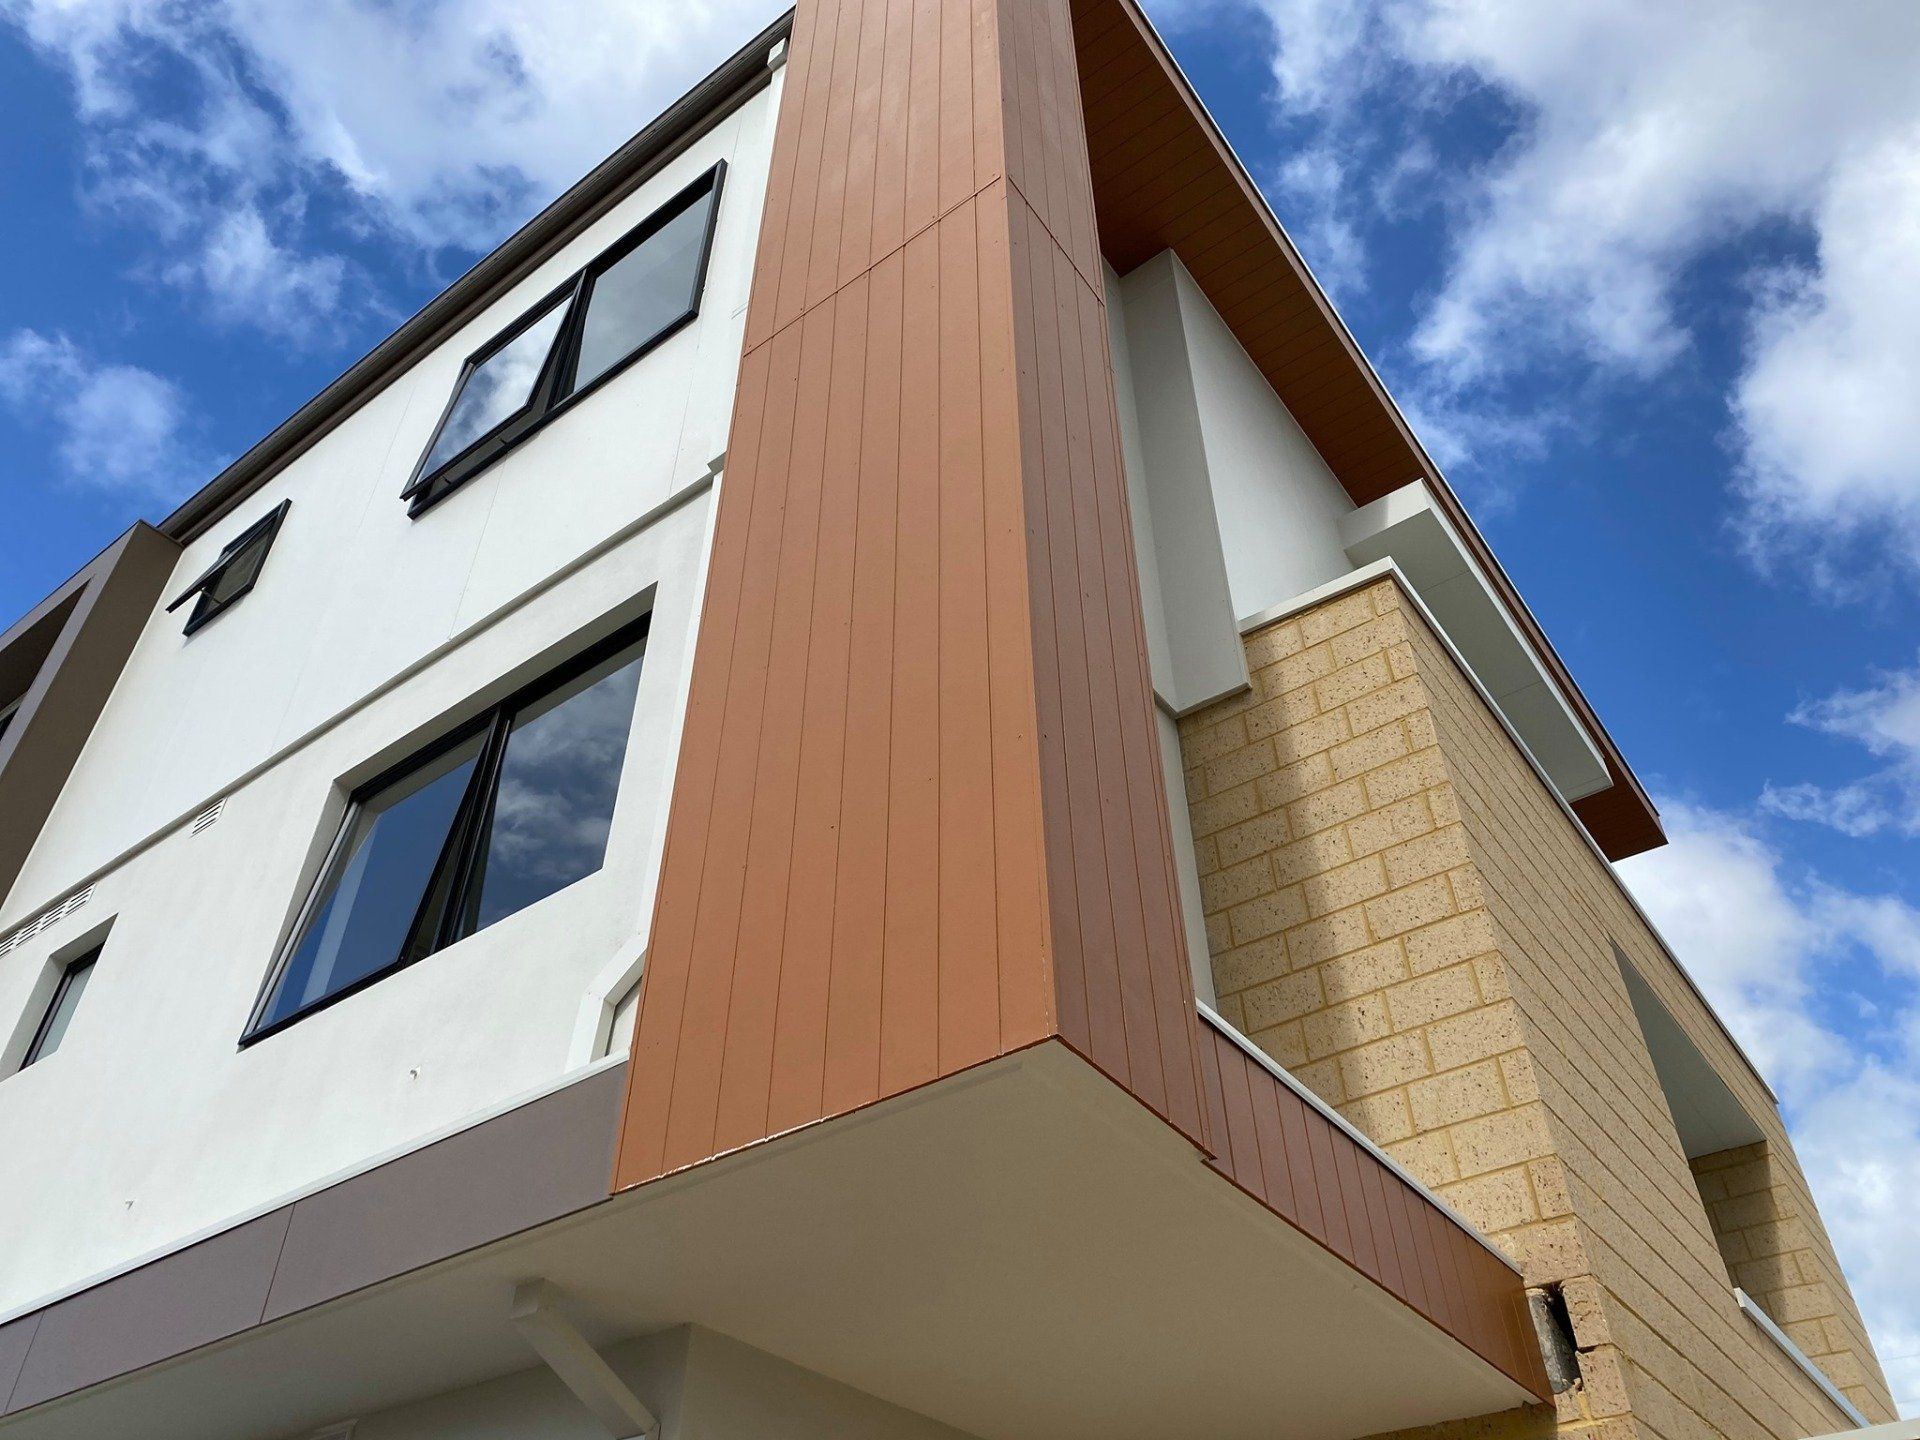 Brown And White Apartment - Canning Vale, WA - Accredit Building Surveying & Construction Services Pty Ltd